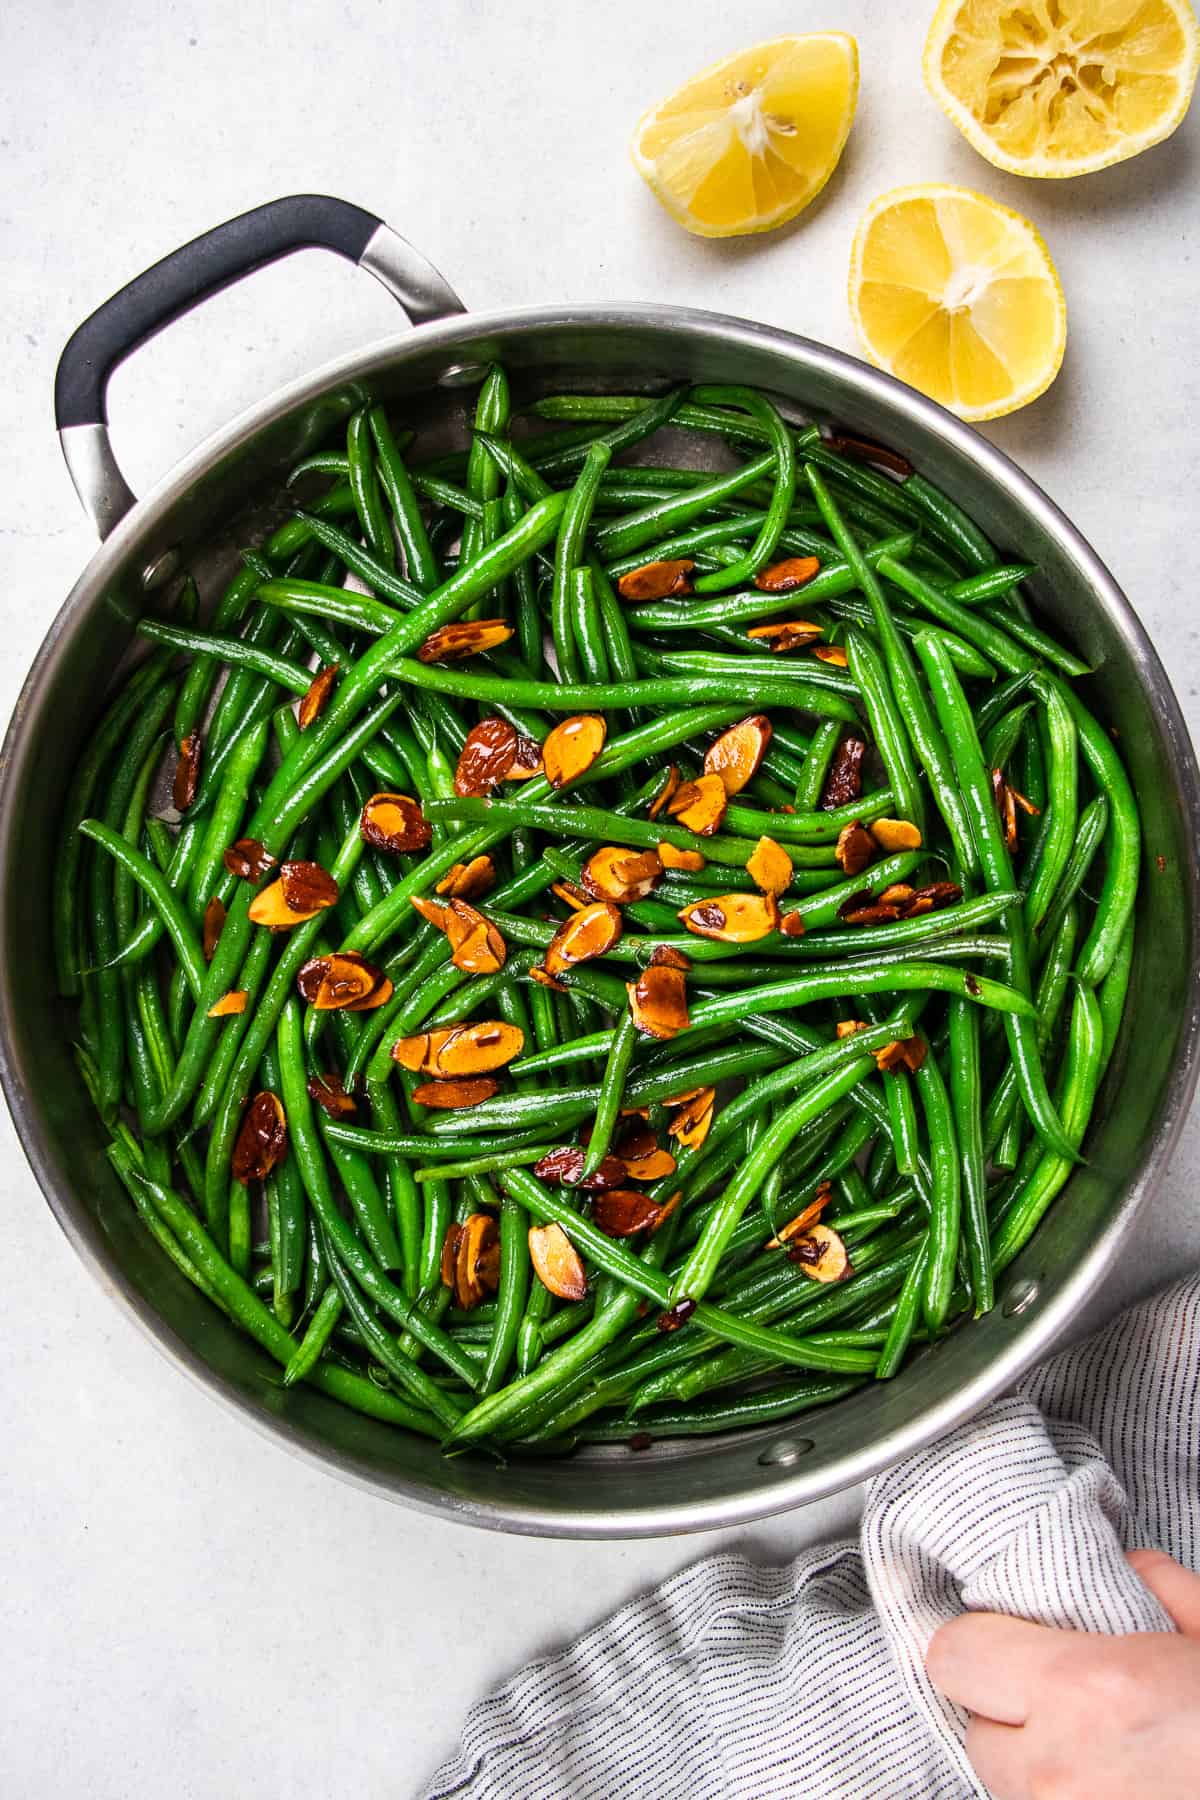 Green beans amandine topped with toasted alonds in a skillet.